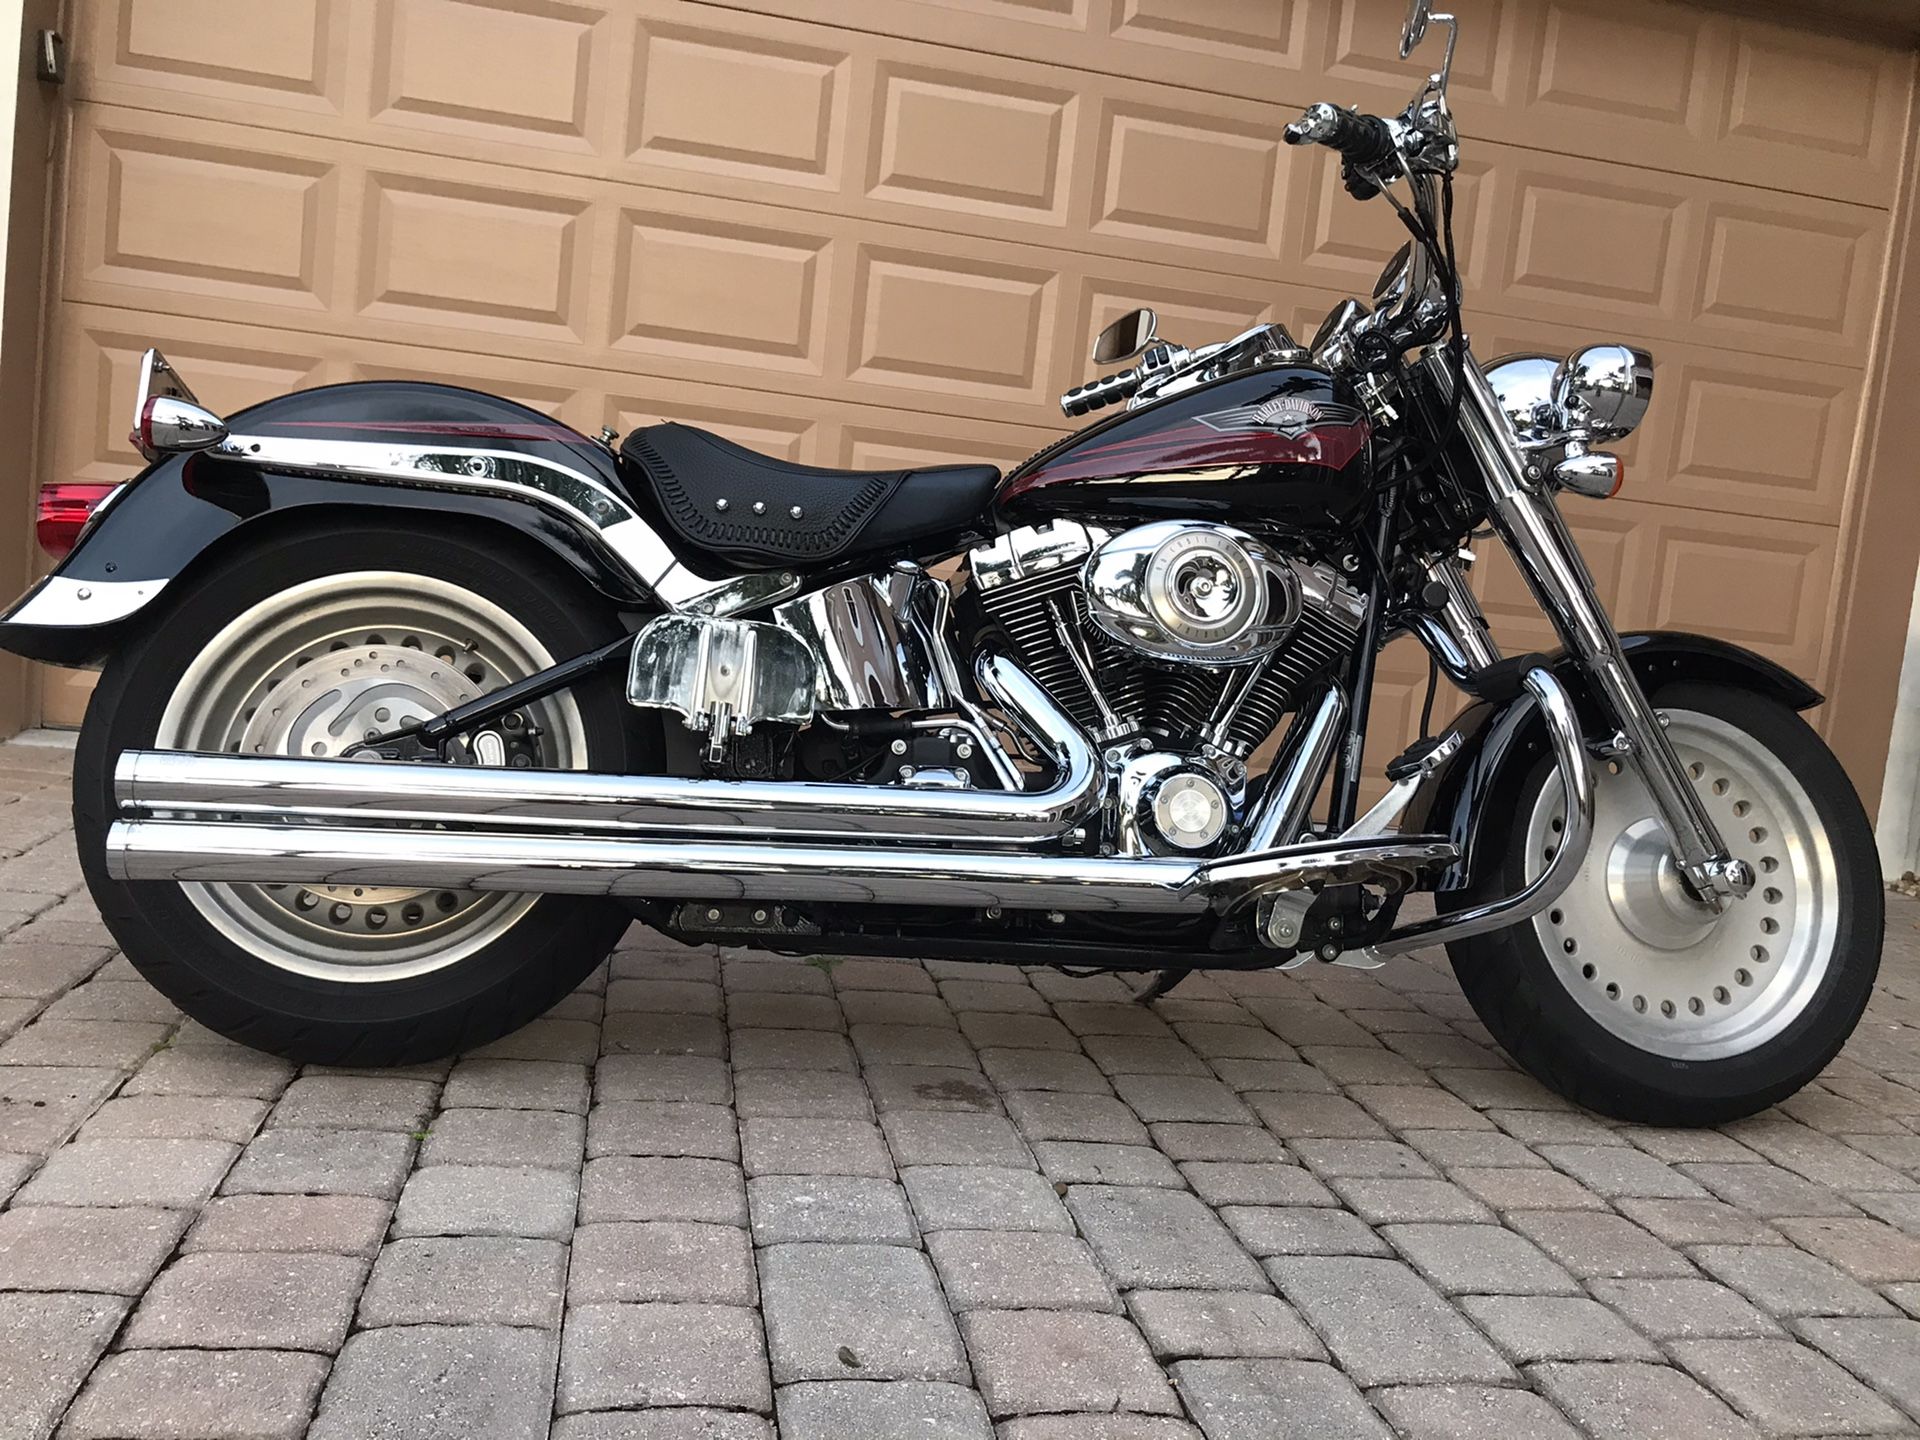 2007 HARLEY-DAVIDSON FAT BOY CLEANEST BIKE AROUND LOADED WITH EXTRAS 10k MILES